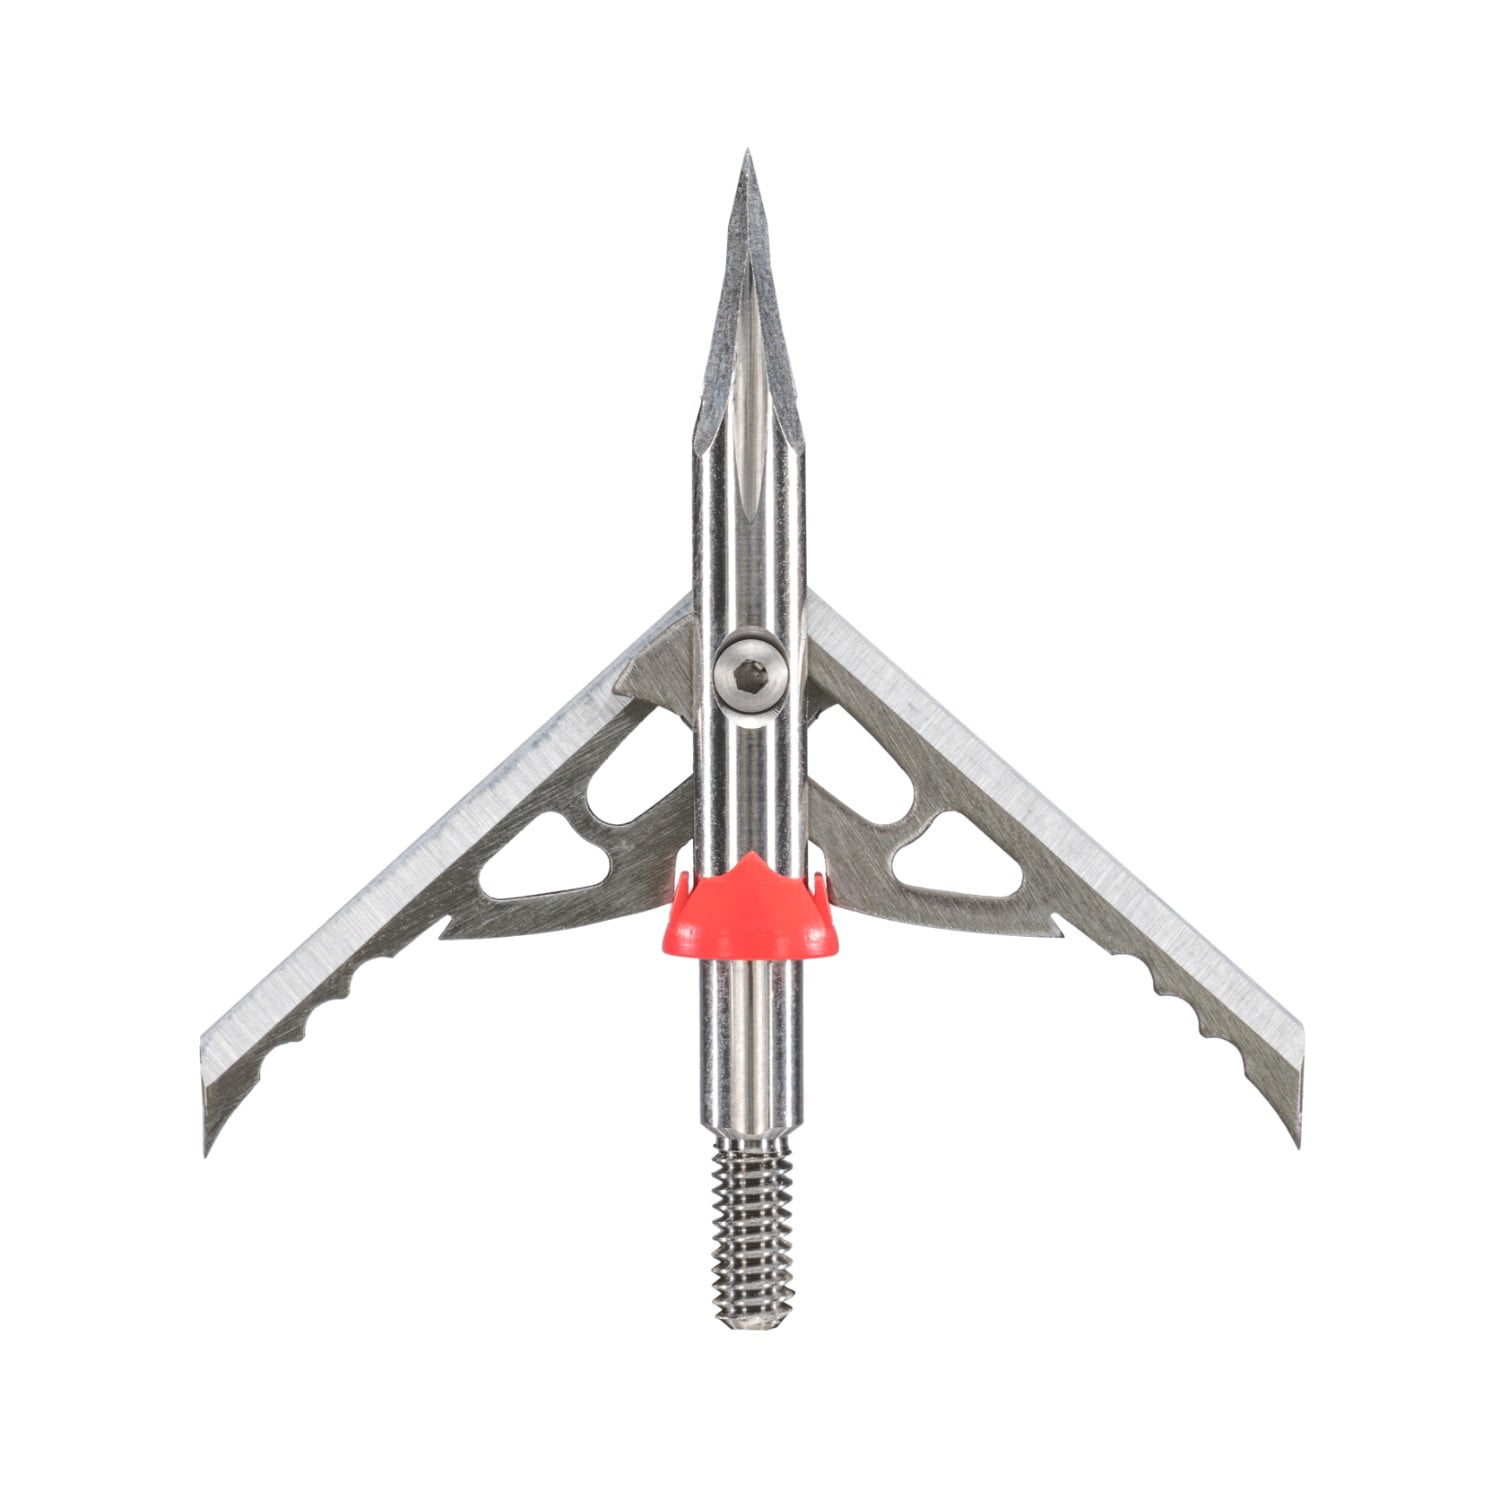 Dead Ringer Trident Broadhead Bowfishing Arrow Tip 1 Piece with 3 Barb Grapple P